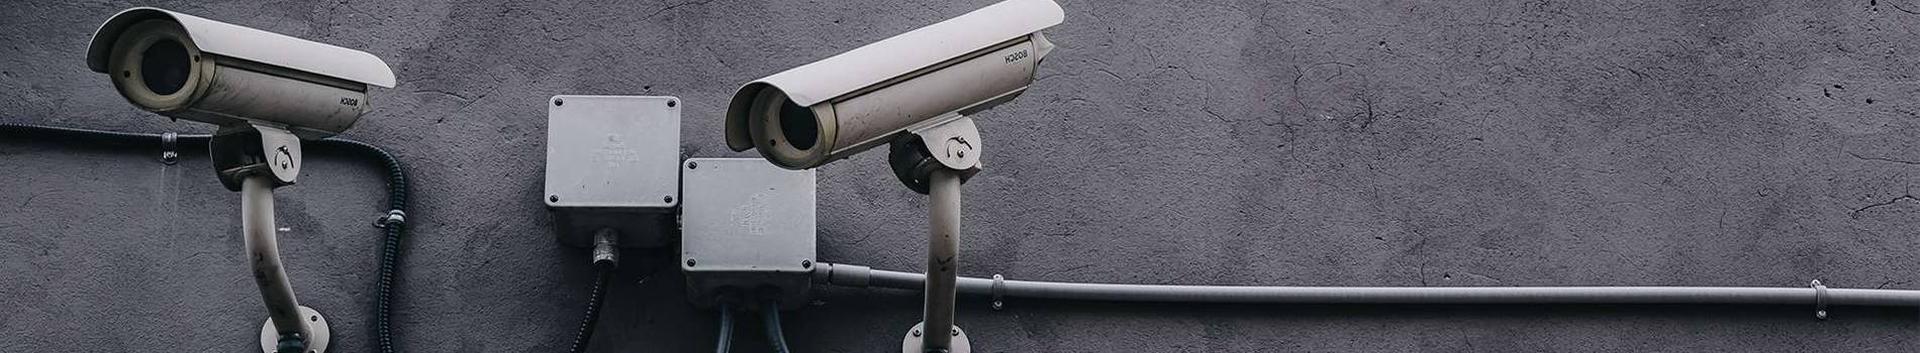 security and surveillance services and other related services, products, consultations